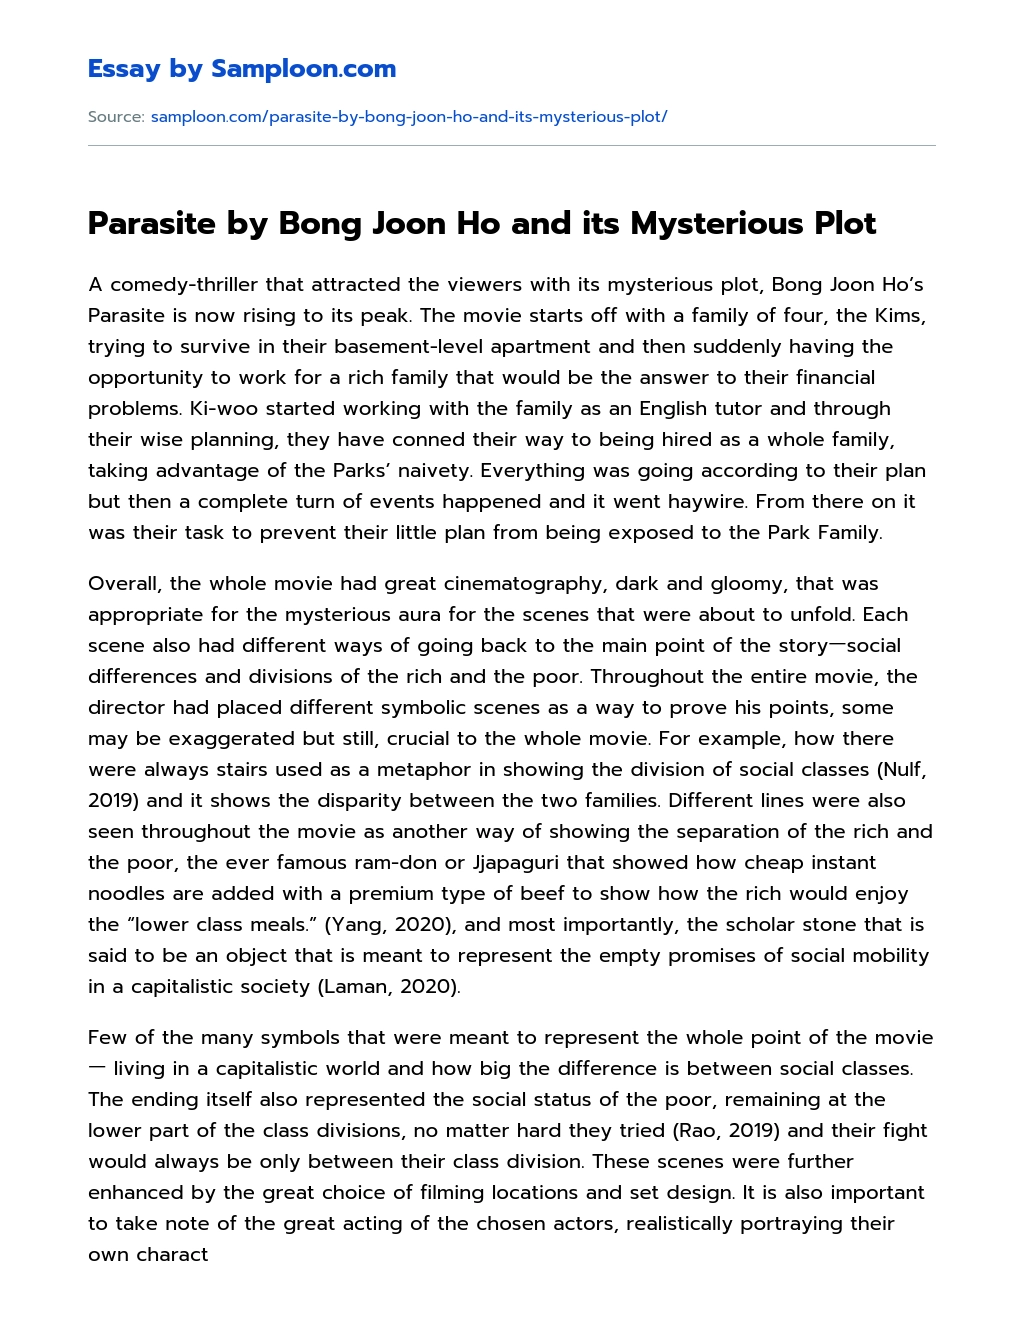 Parasite by Bong Joon Ho and its Mysterious Plot Film Analysis essay